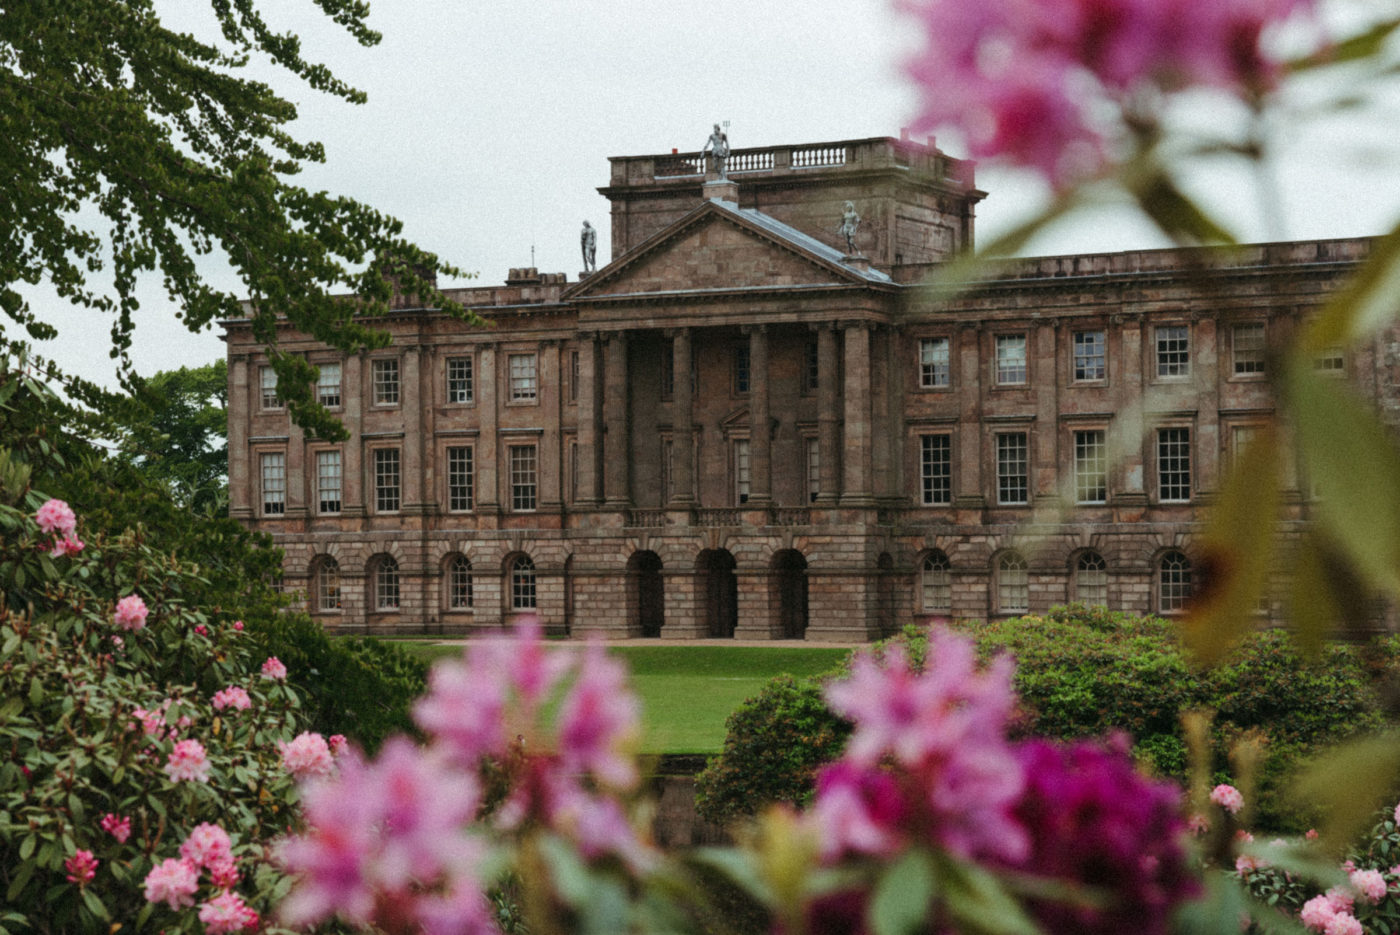 Outside view of the mansion at Lyme Park Estate.